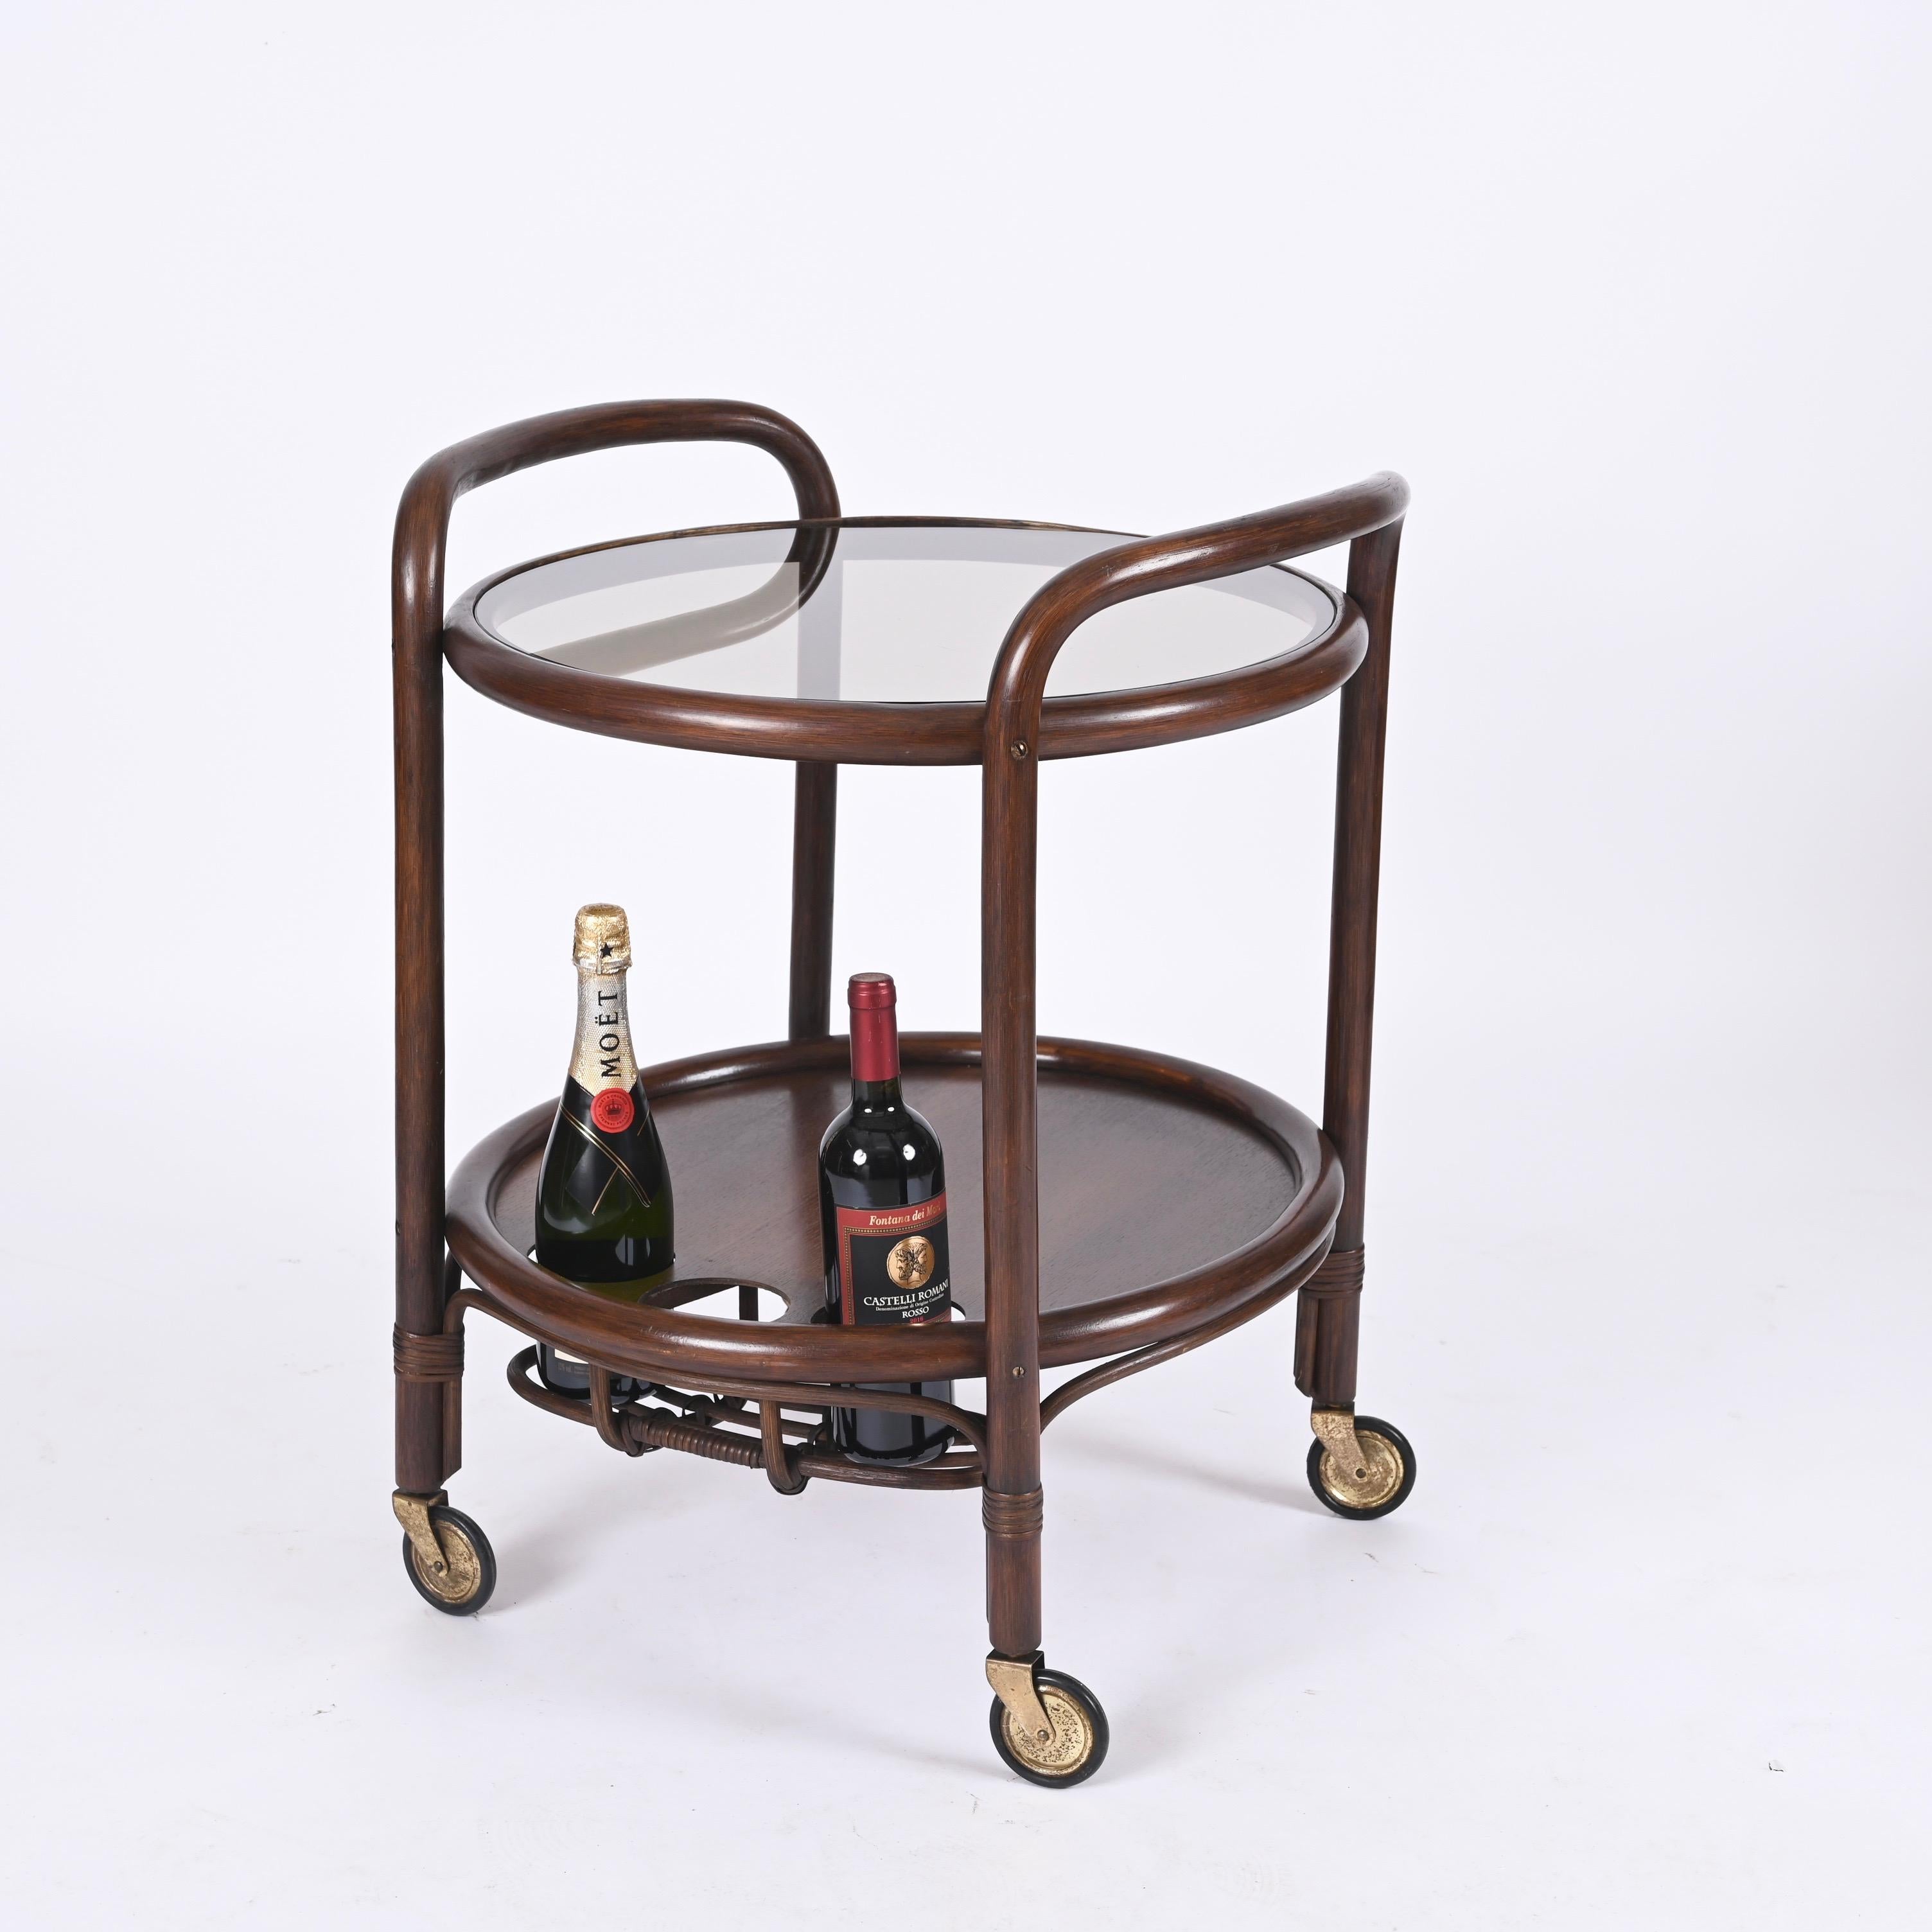 Midcentury Bar Serving Cart in Bamboo, Rattan and Smoked Glass, Italy, 1970s For Sale 3